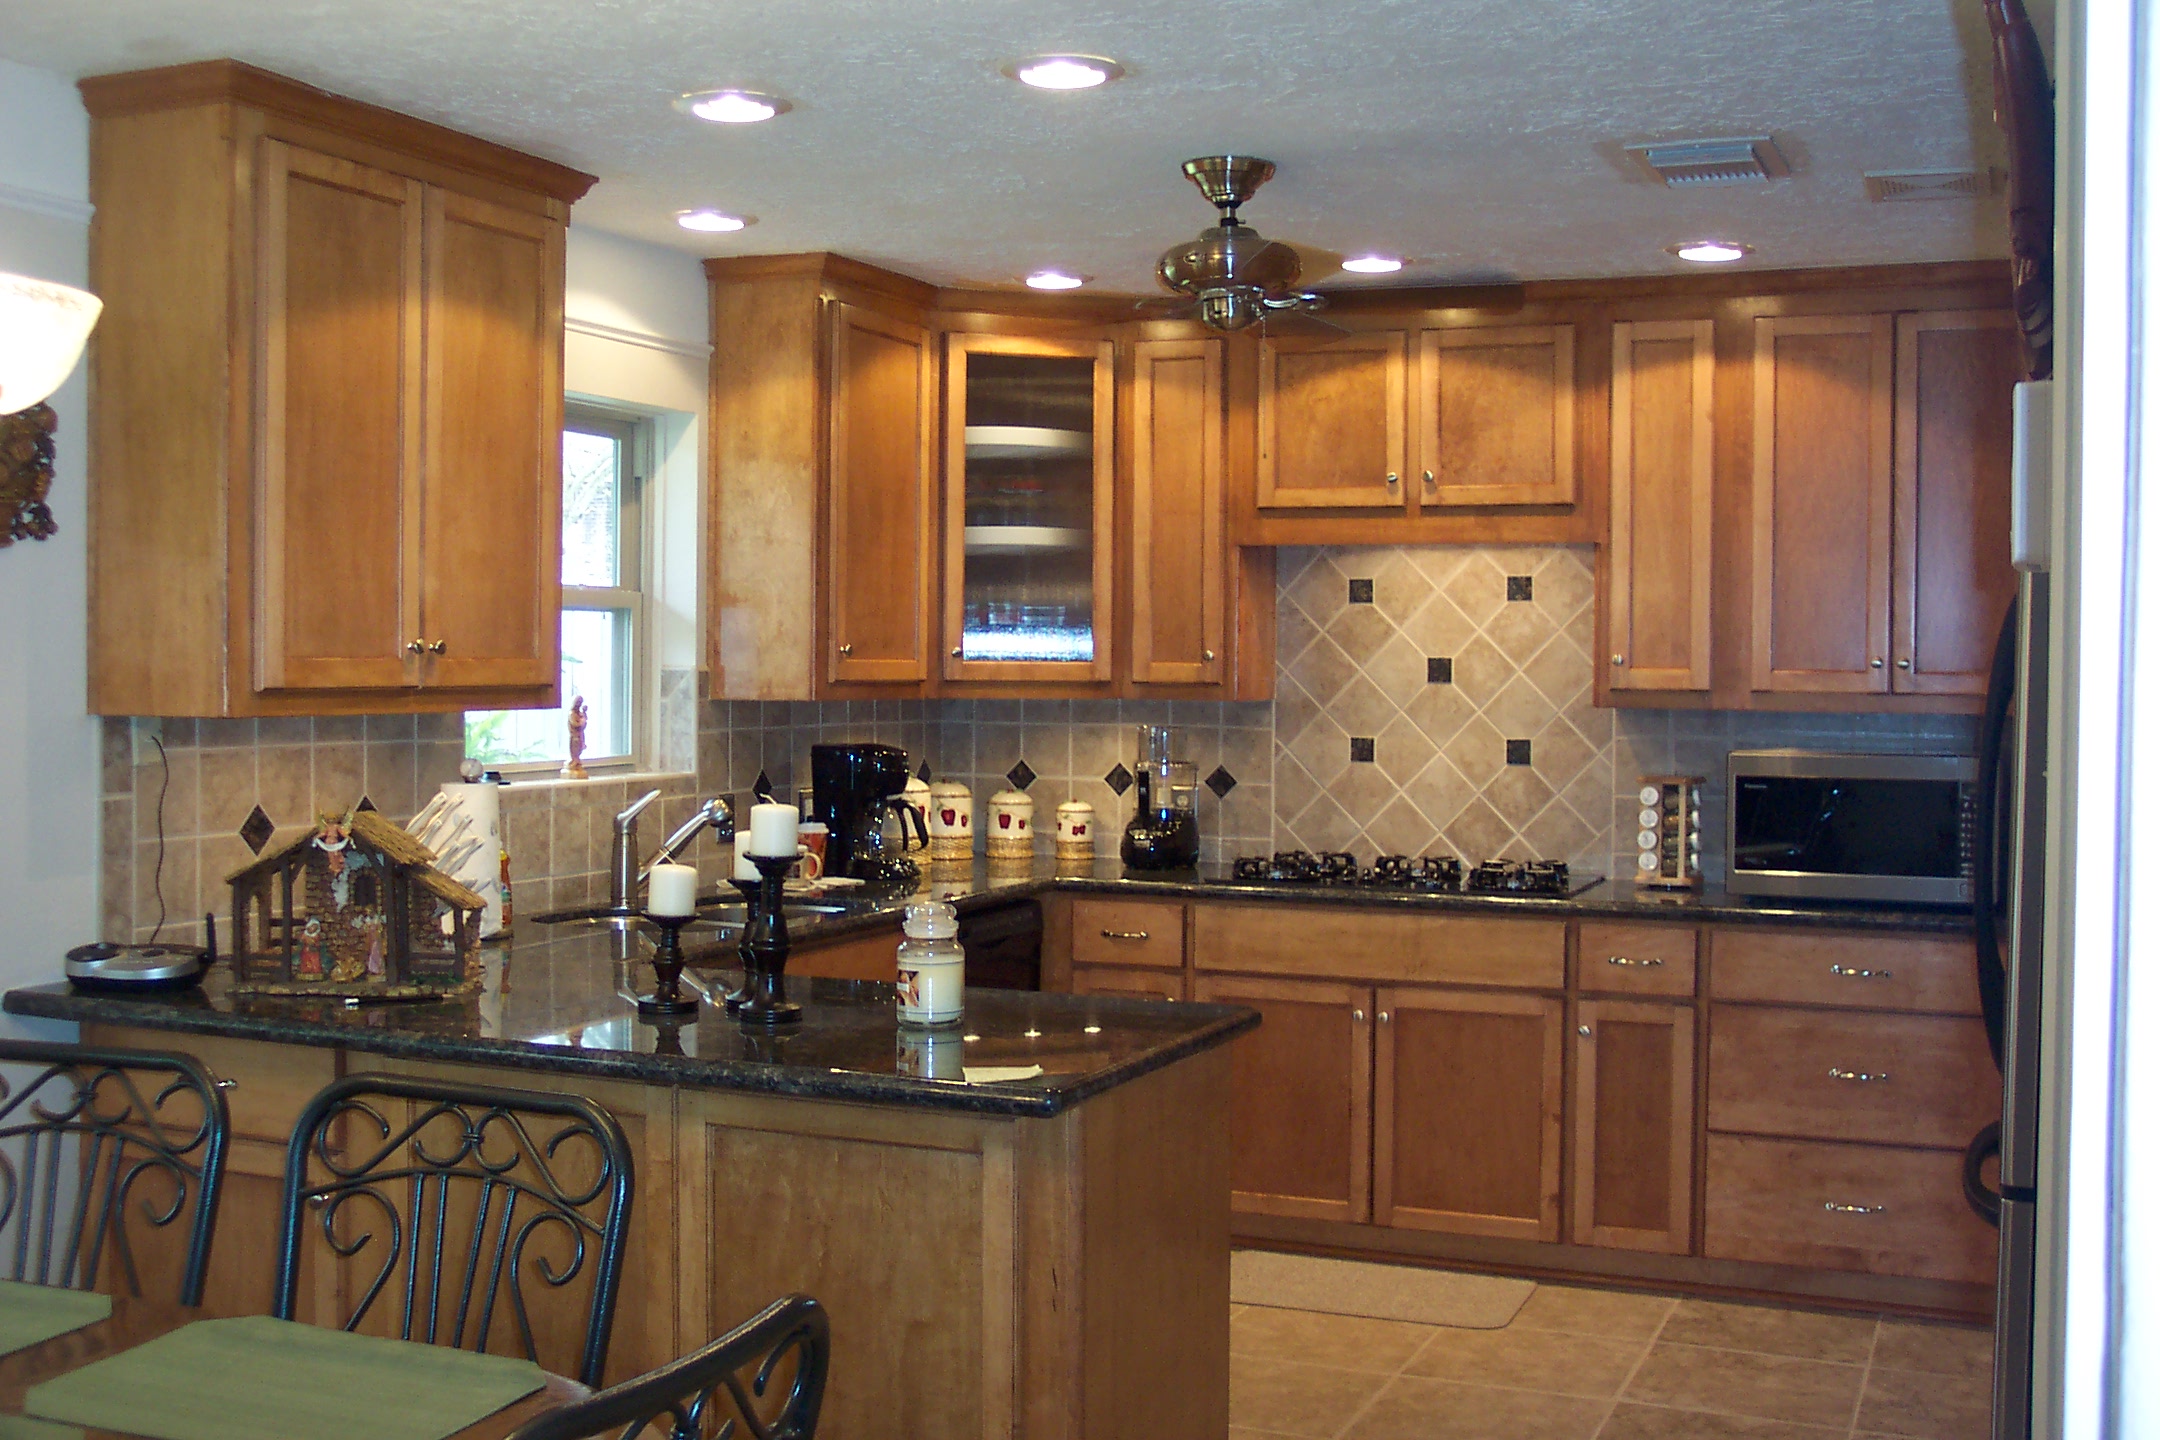 kitchen remodeling small remodel kitchens budget designs idea layout magment simple themes island tips choose board